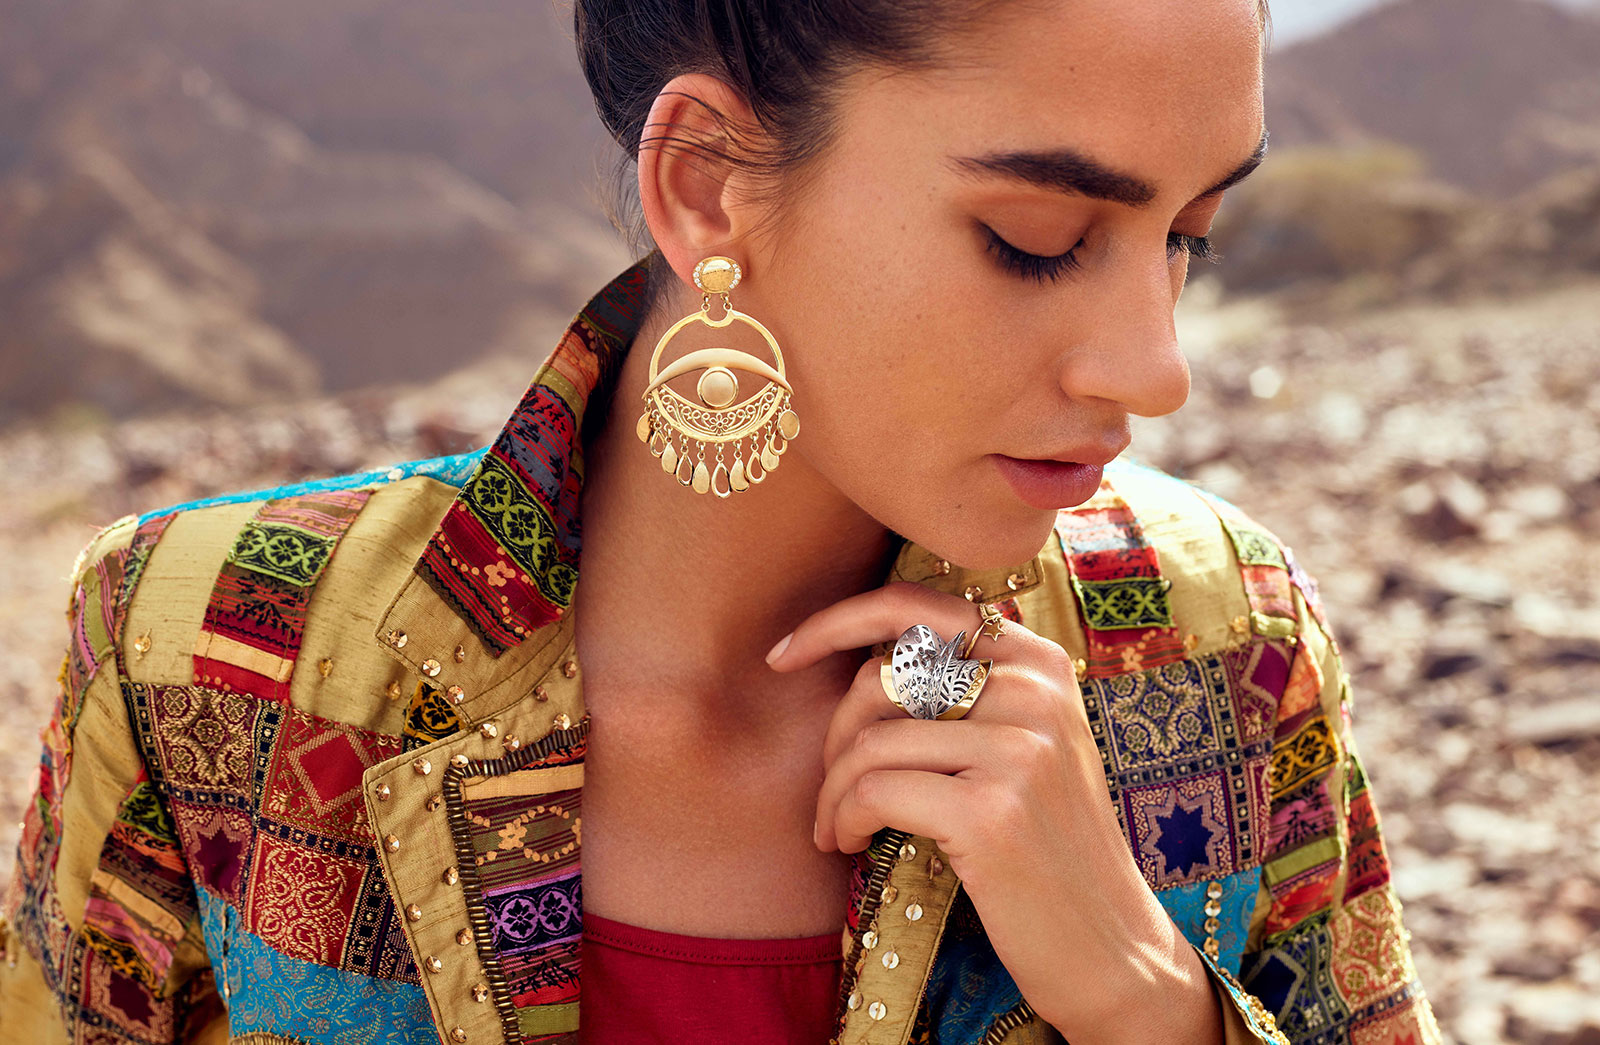 Earrings and a ring from The Gypsy collection by Azza Fahmy